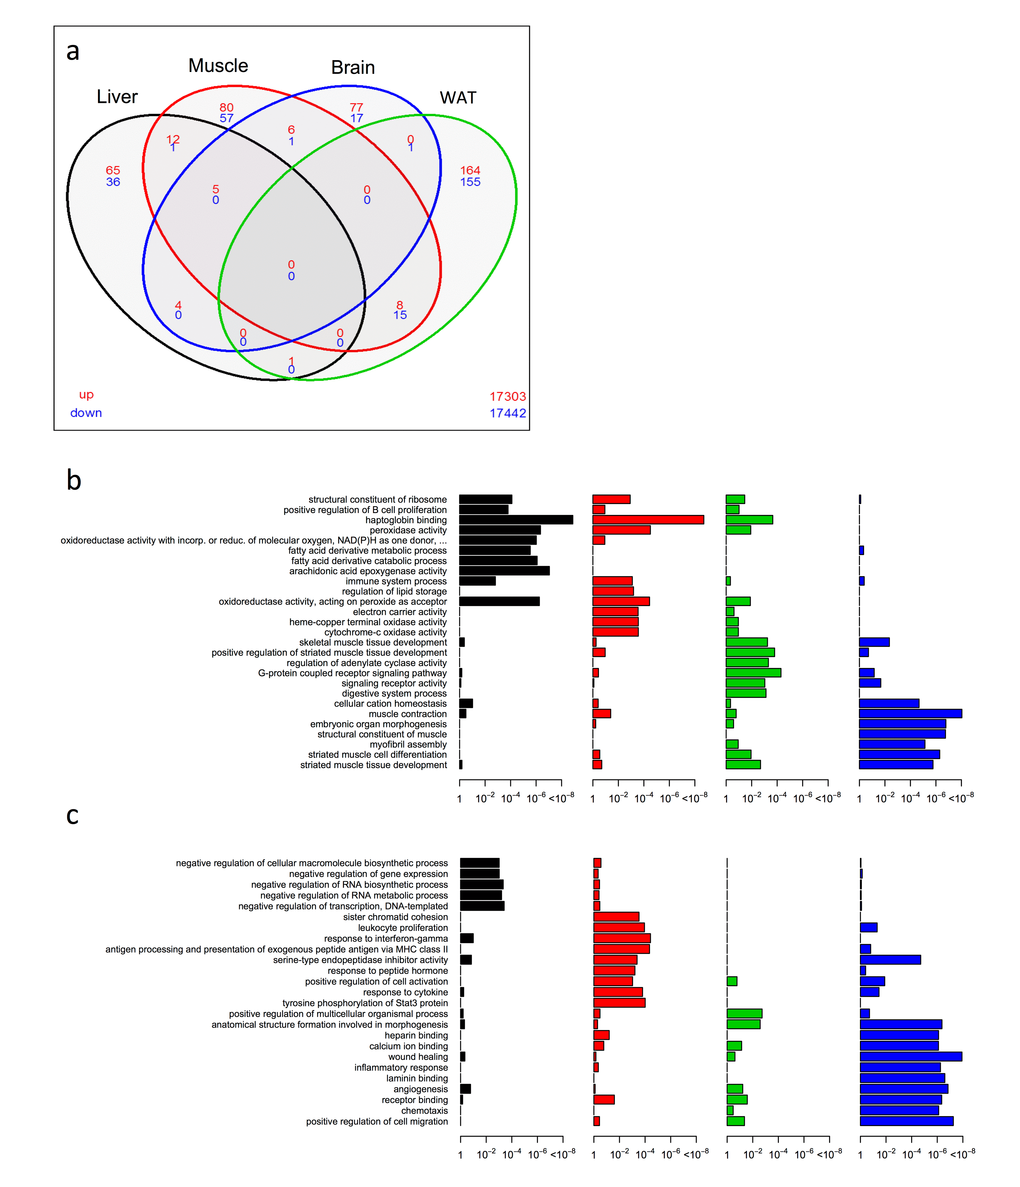 Shared and distinct gene expression profile among four tissues in KOAL mice. (a) Venn diagram of similar expressed genes across liver, skeletal muscle, brain and WAT tissue in KOAL mice. Significantly up-regulated genes are shown in red and significantly down-regulated genes are shown in blue. Common genes that are significantly up- or down-regulated are found in overlapping ovals. The numbers in the bottom far right denotes the number of genes expressed but not significantly up-regulated (red) or down-regulated (blue). (b) Up-regulated gene ontology (GO) terms in liver, skeletal muscle, brain and WAT of KOAL mice versus WTAL mice. (c) Down-regulated GO terms in liver, skeletal muscle, brain and WAT of KOAL mice.